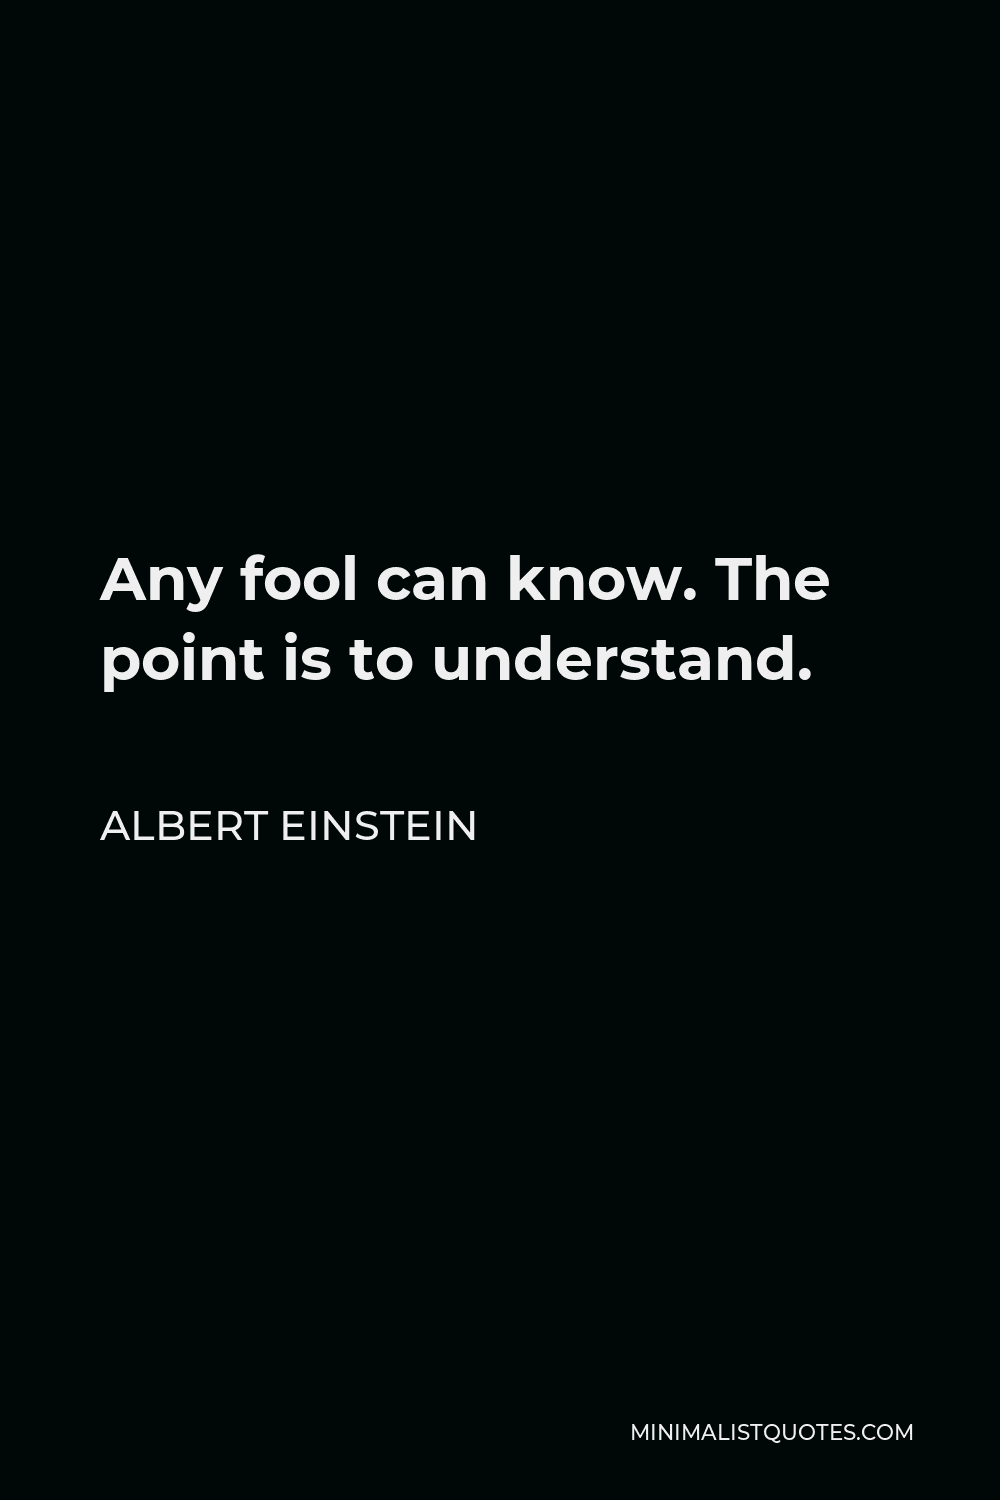 Albert Einstein Quote - Any fool can know. The point is to understand.